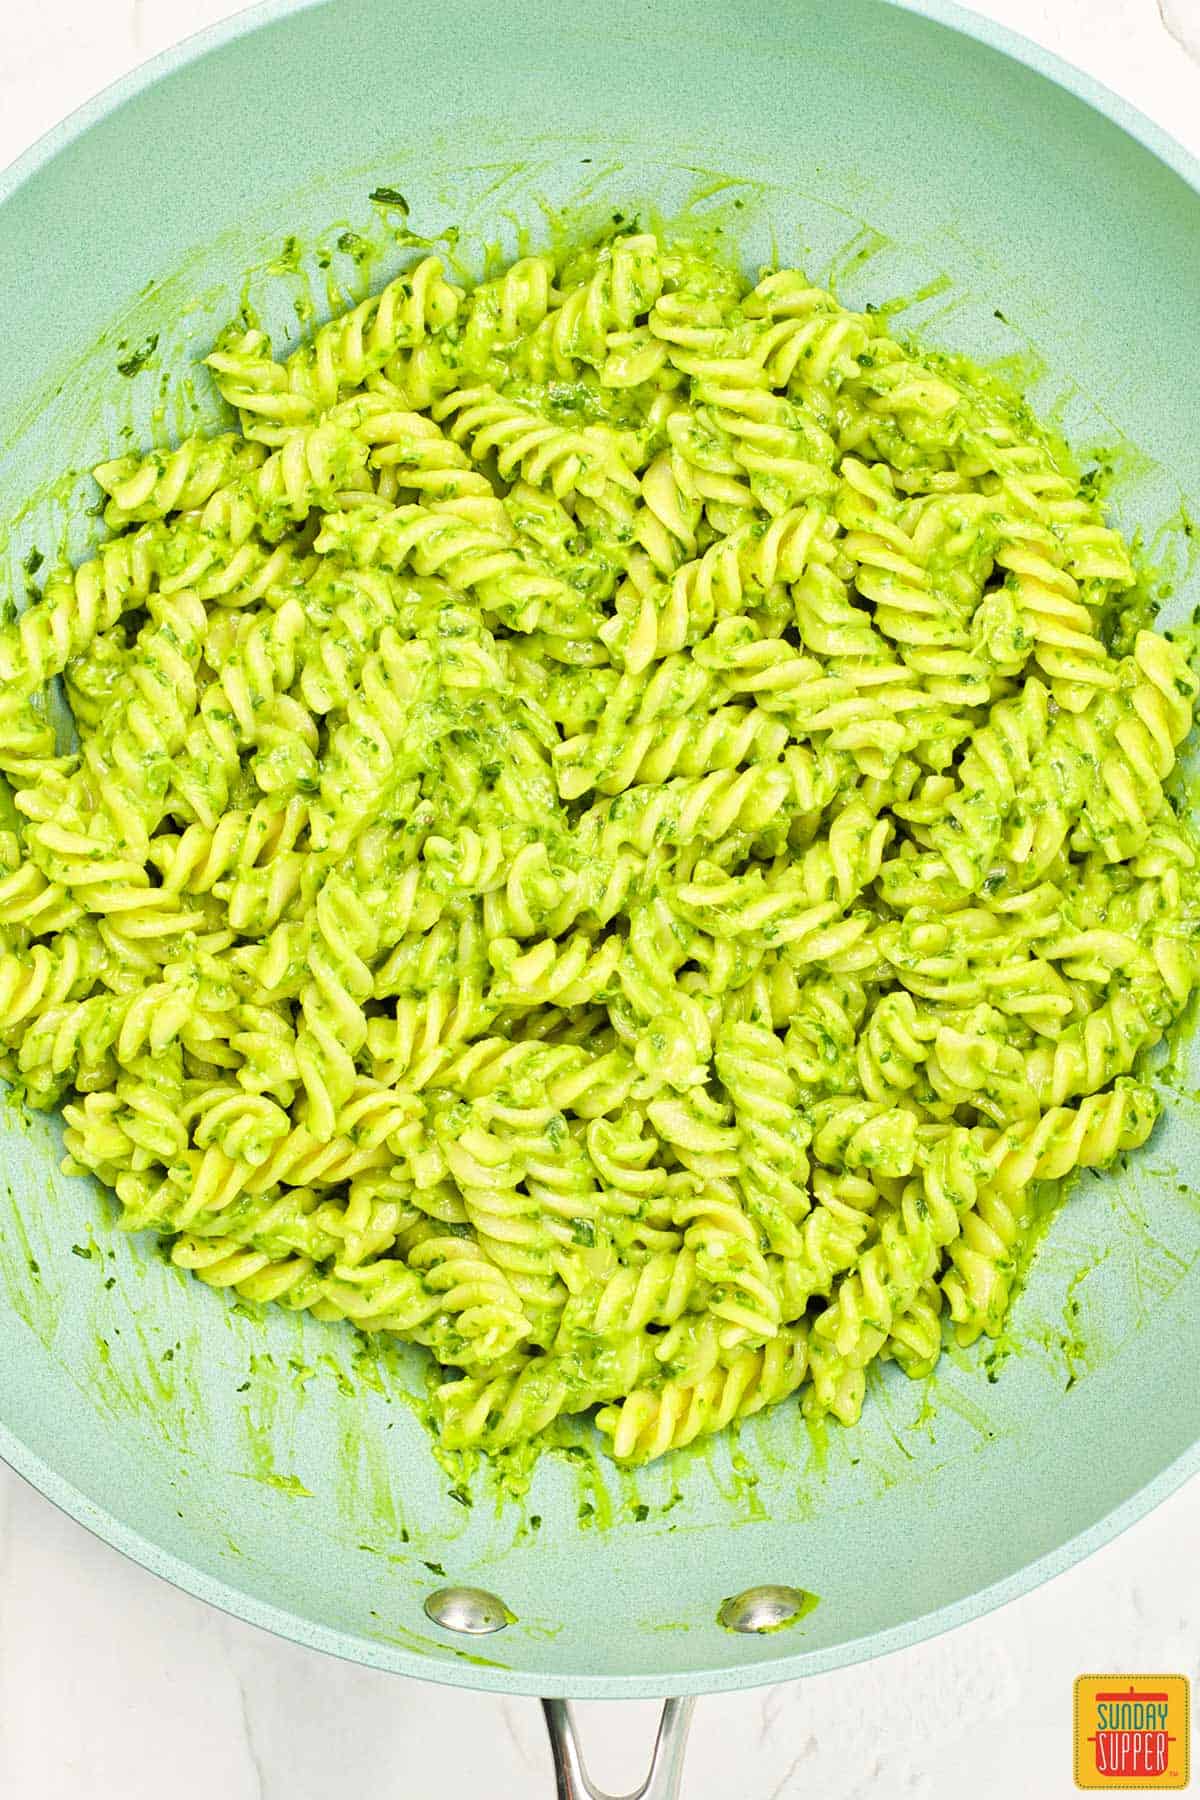 the pasta added into the avocado pasta sauce in a pan